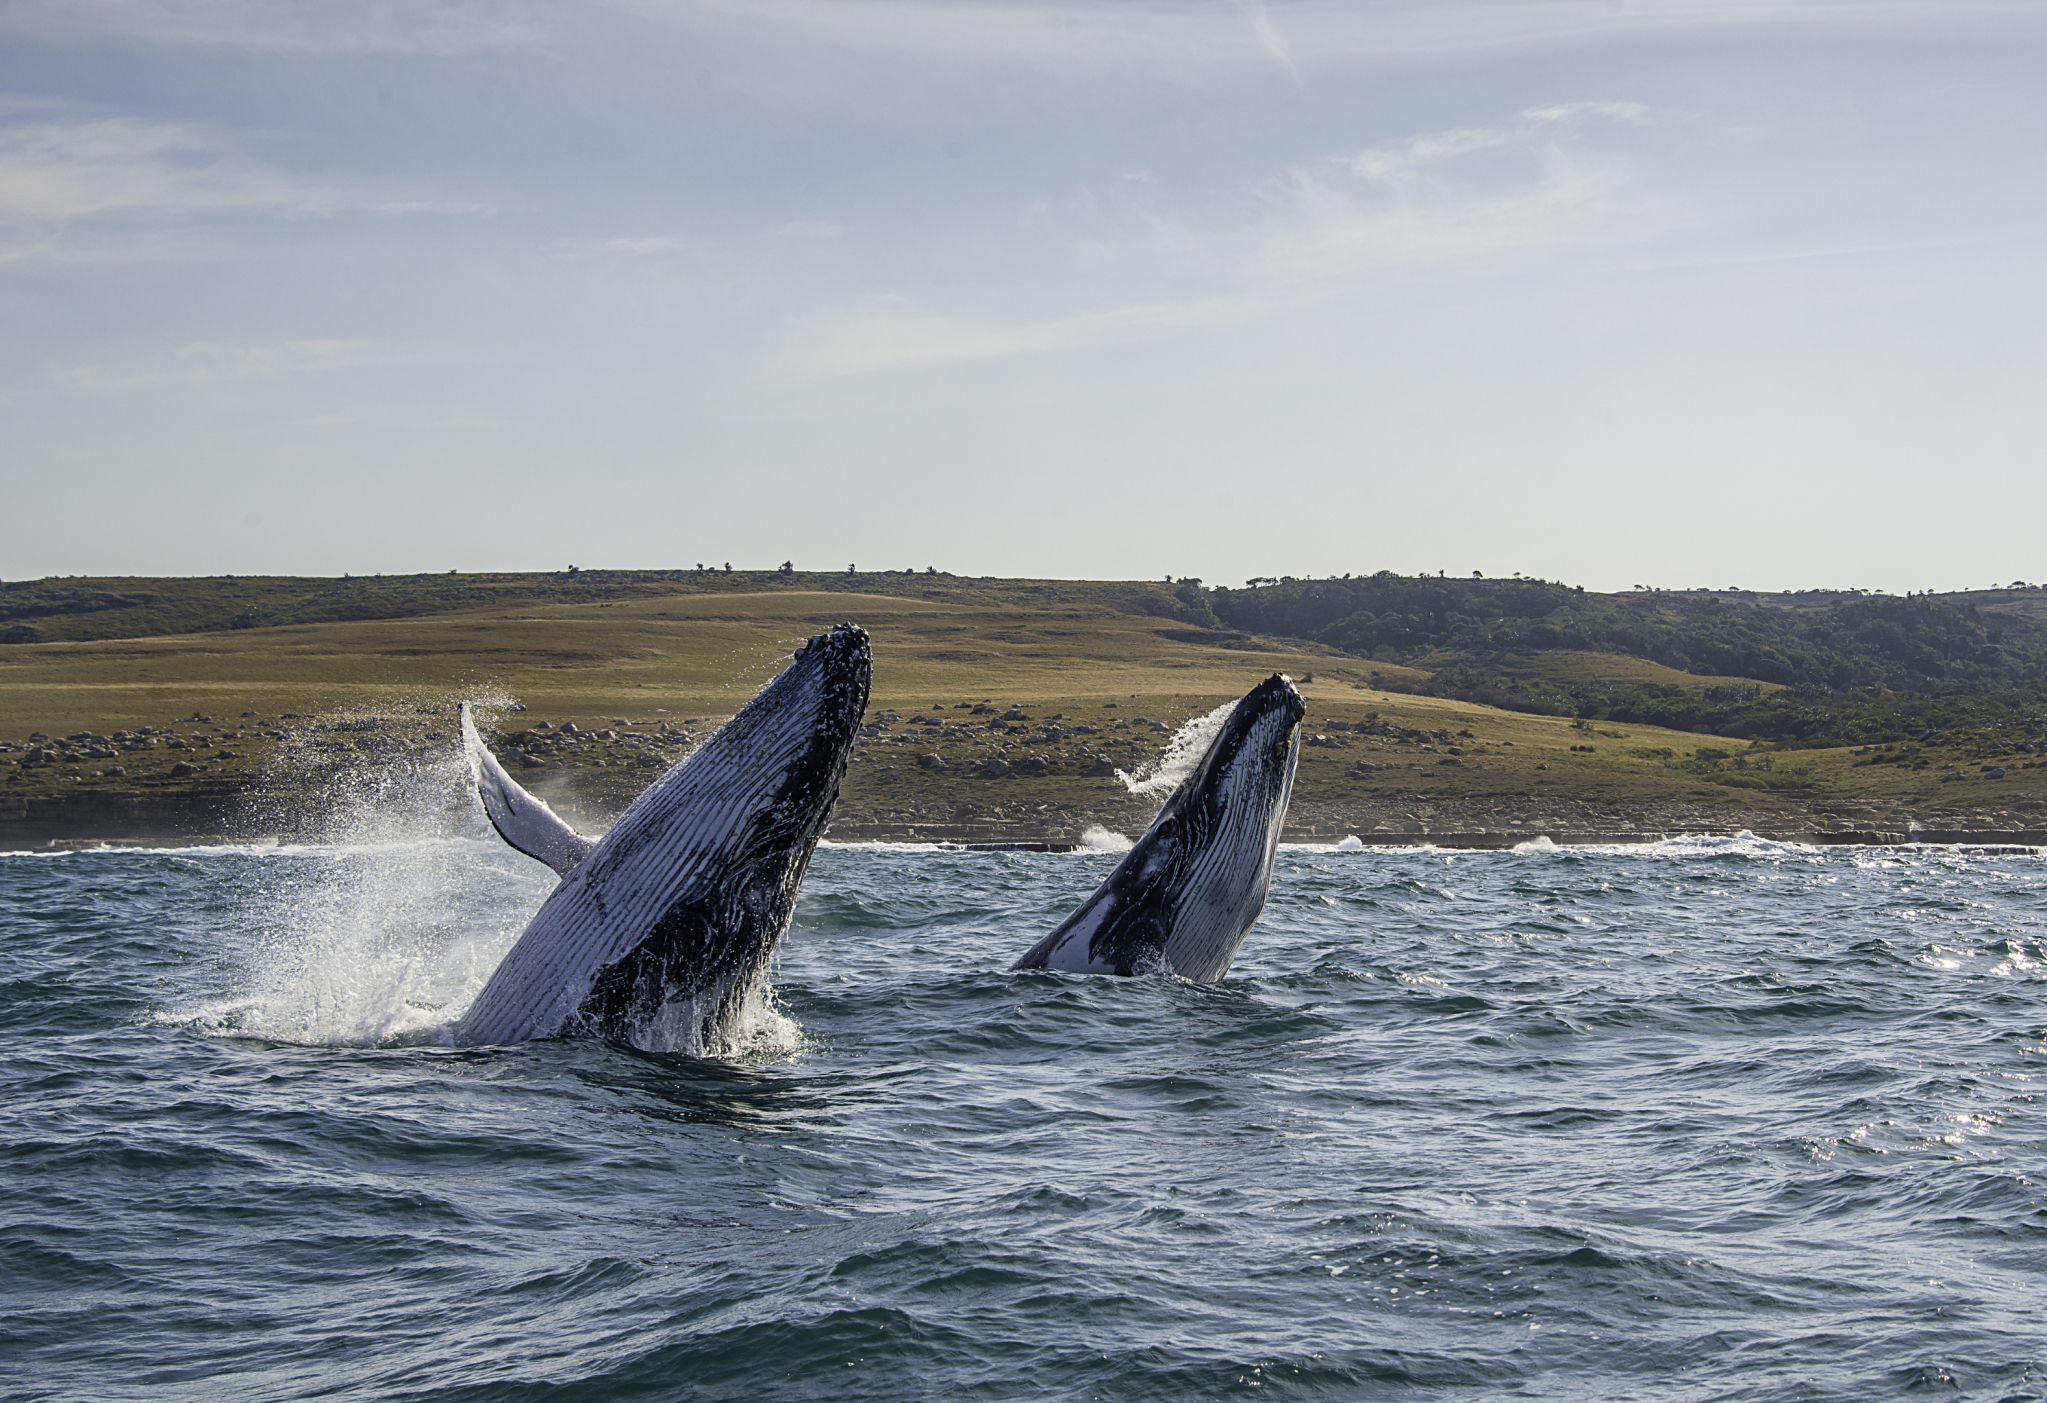 Whales Off the Coastline in South Africa